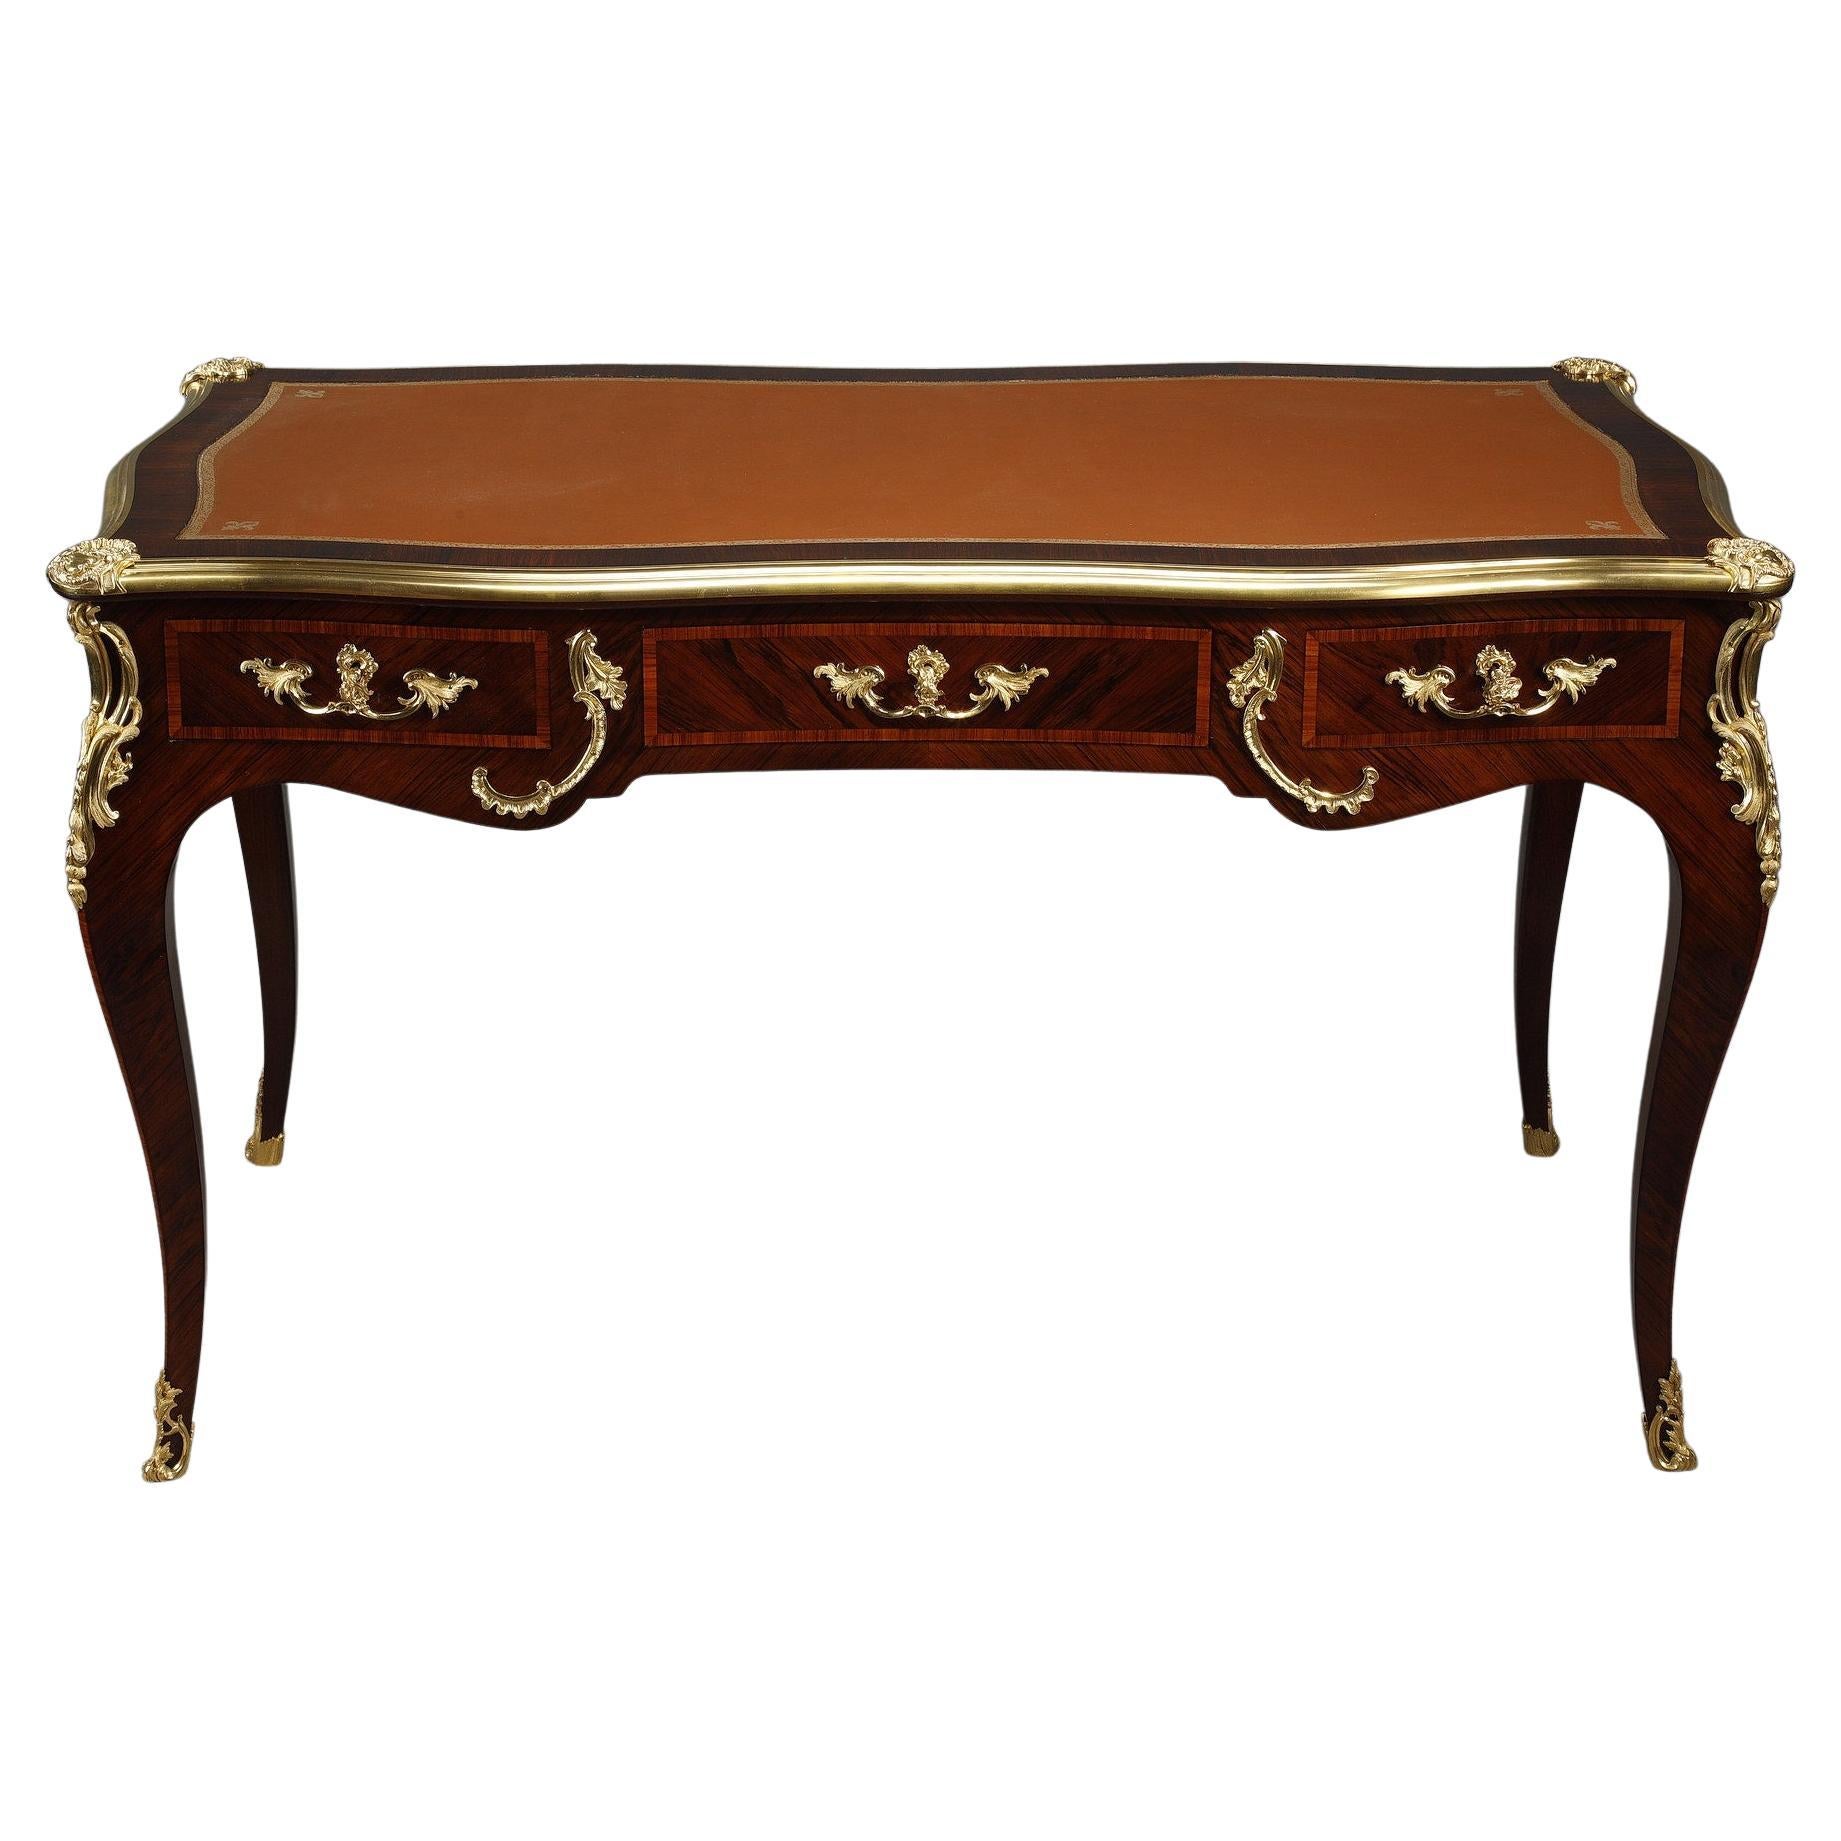 Flat desk of style Louis XV, stamped Maurice Rinck